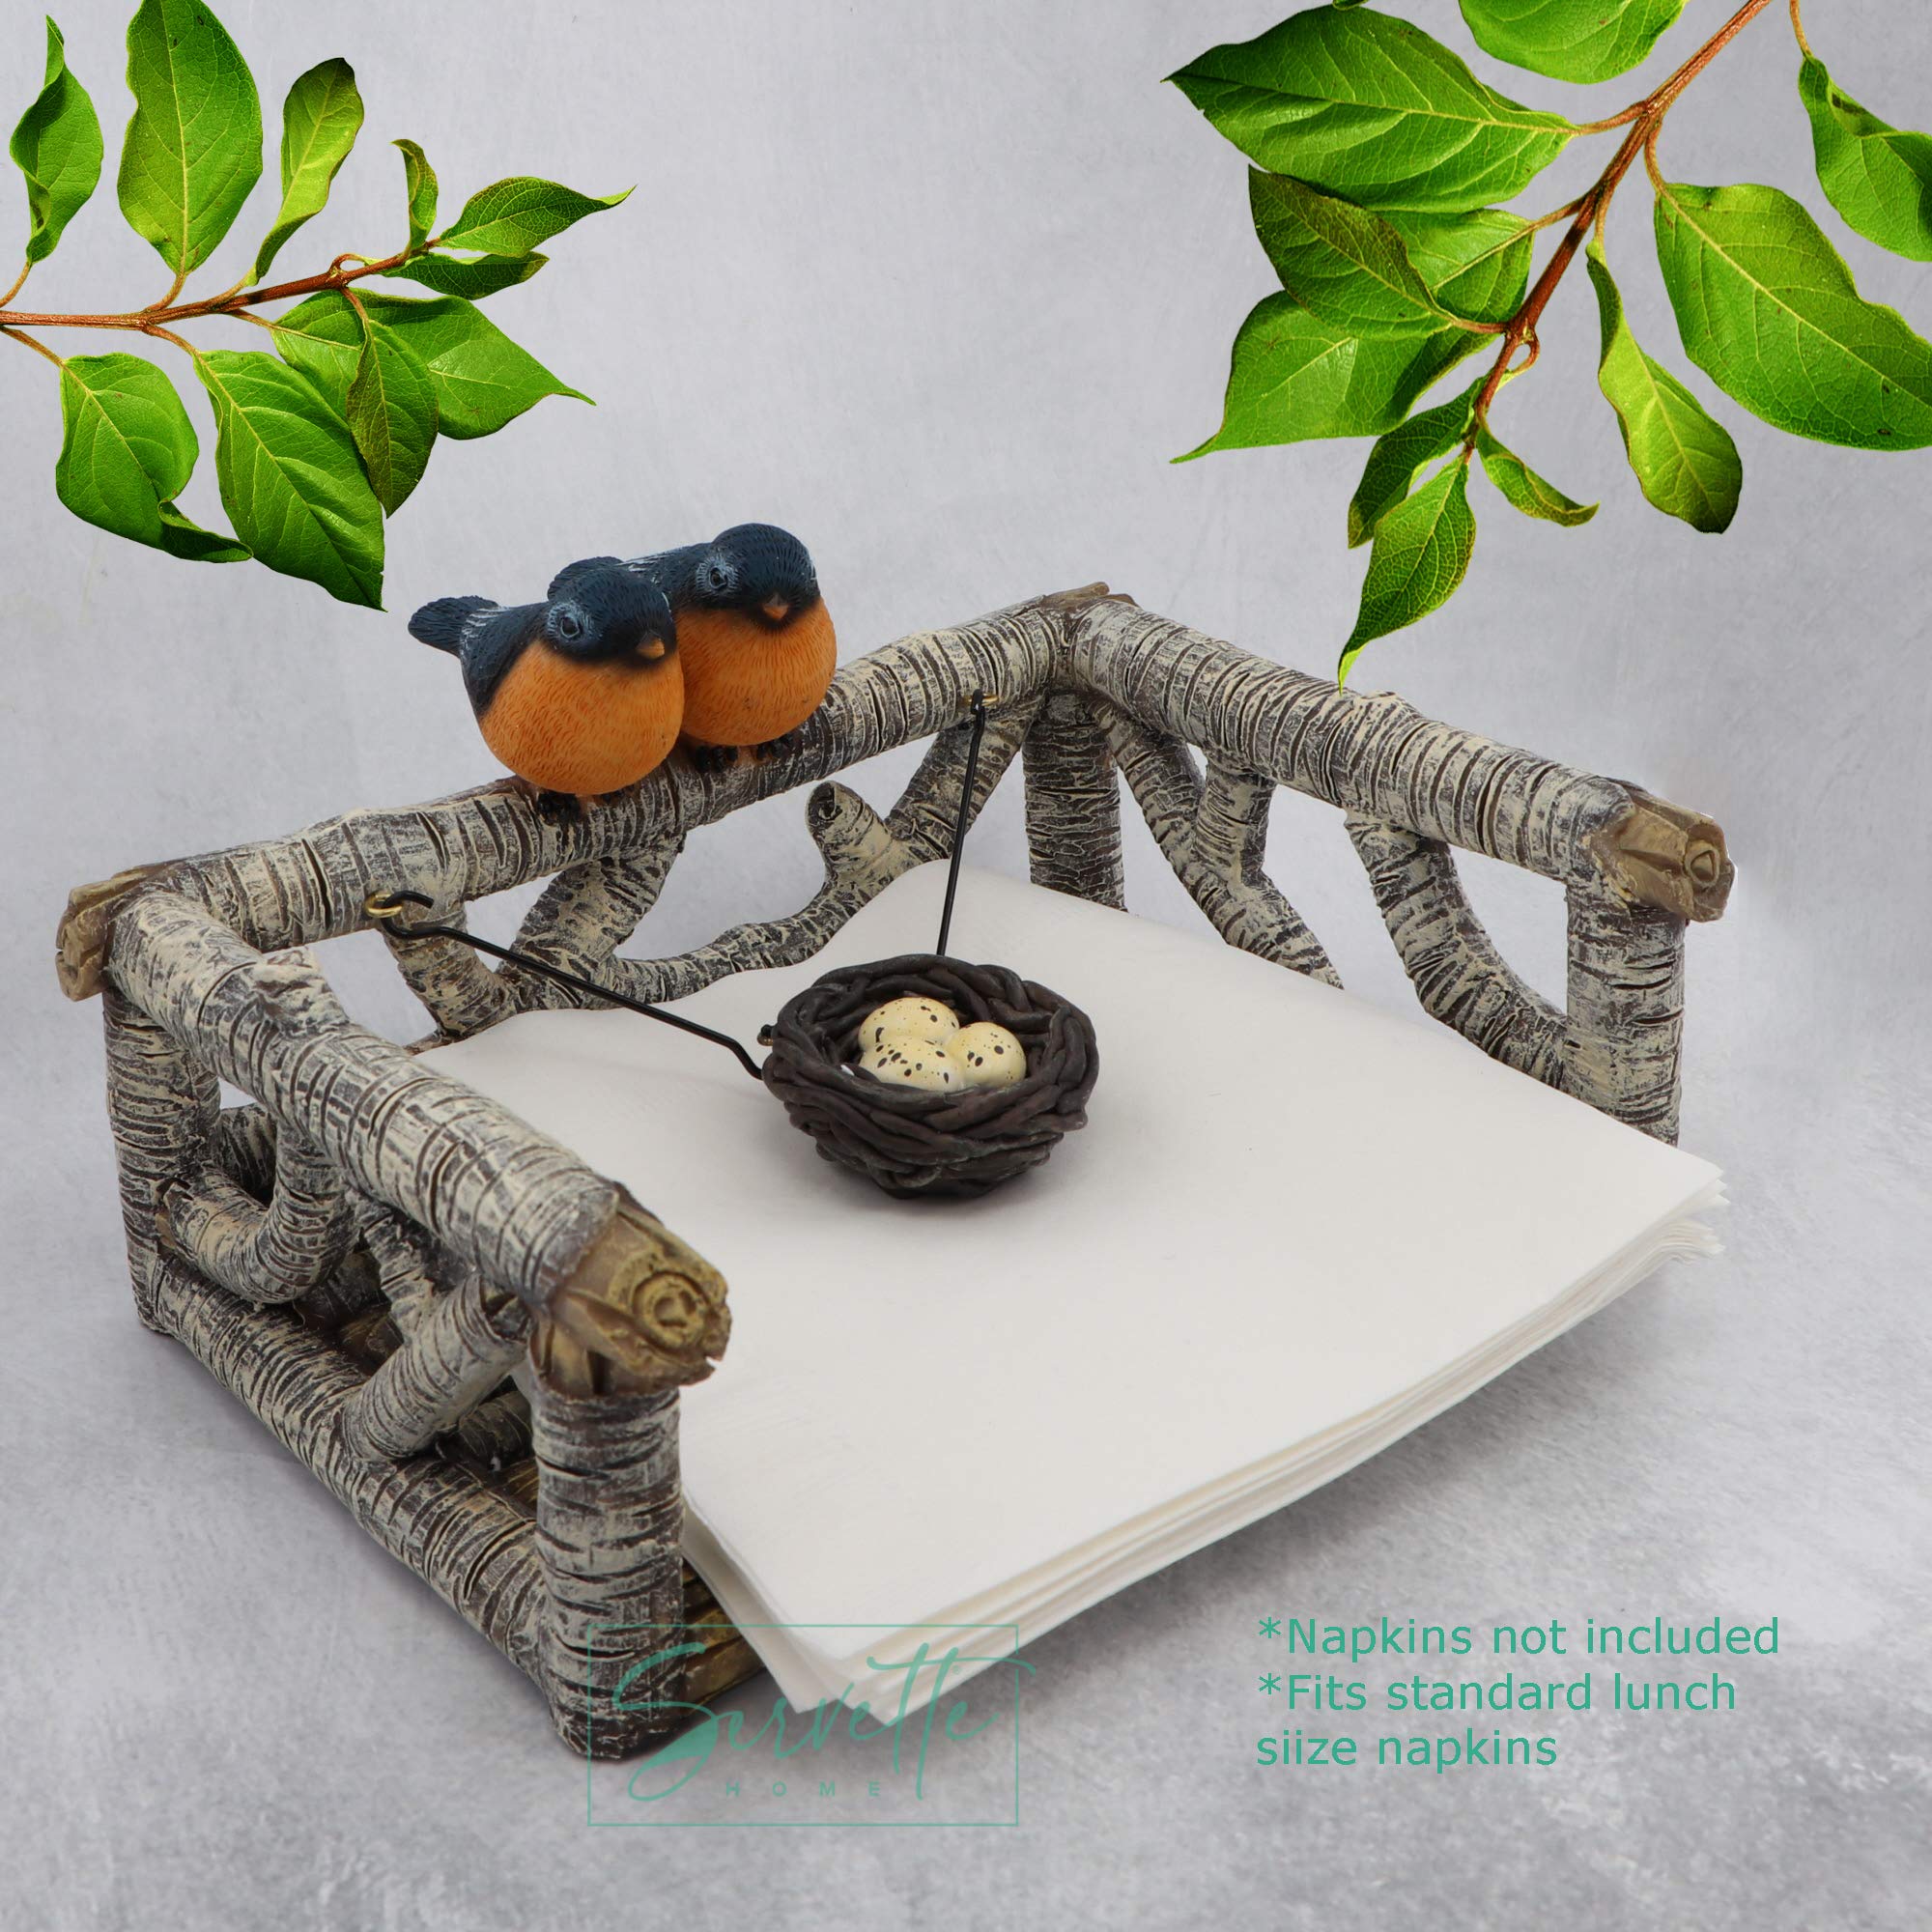 Rustic Polyresin Weighted Flat Napkin Holder - Birch Branches With Birds' Nest